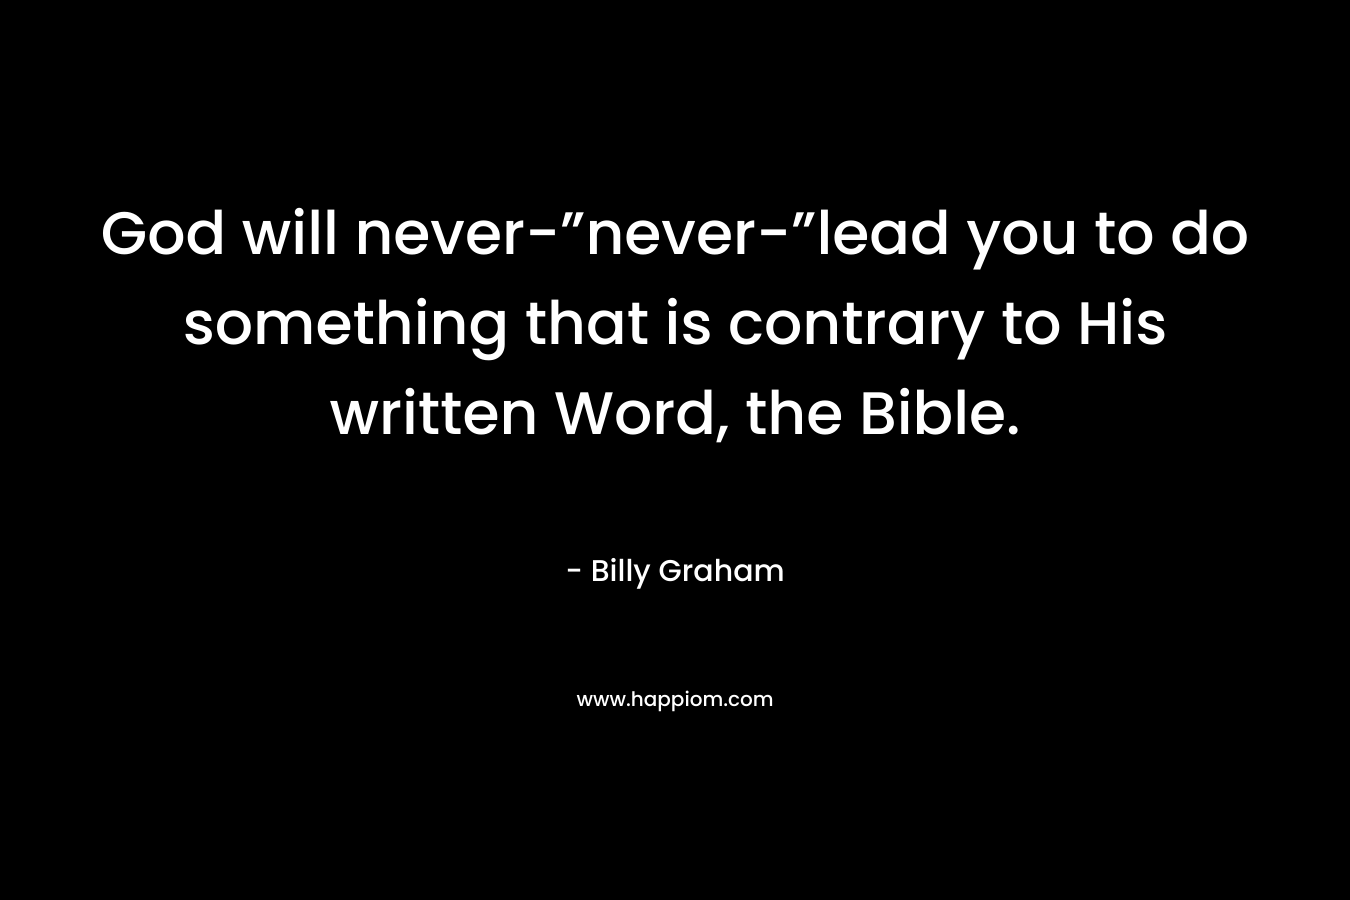 God will never-”never-”lead you to do something that is contrary to His written Word, the Bible. – Billy Graham